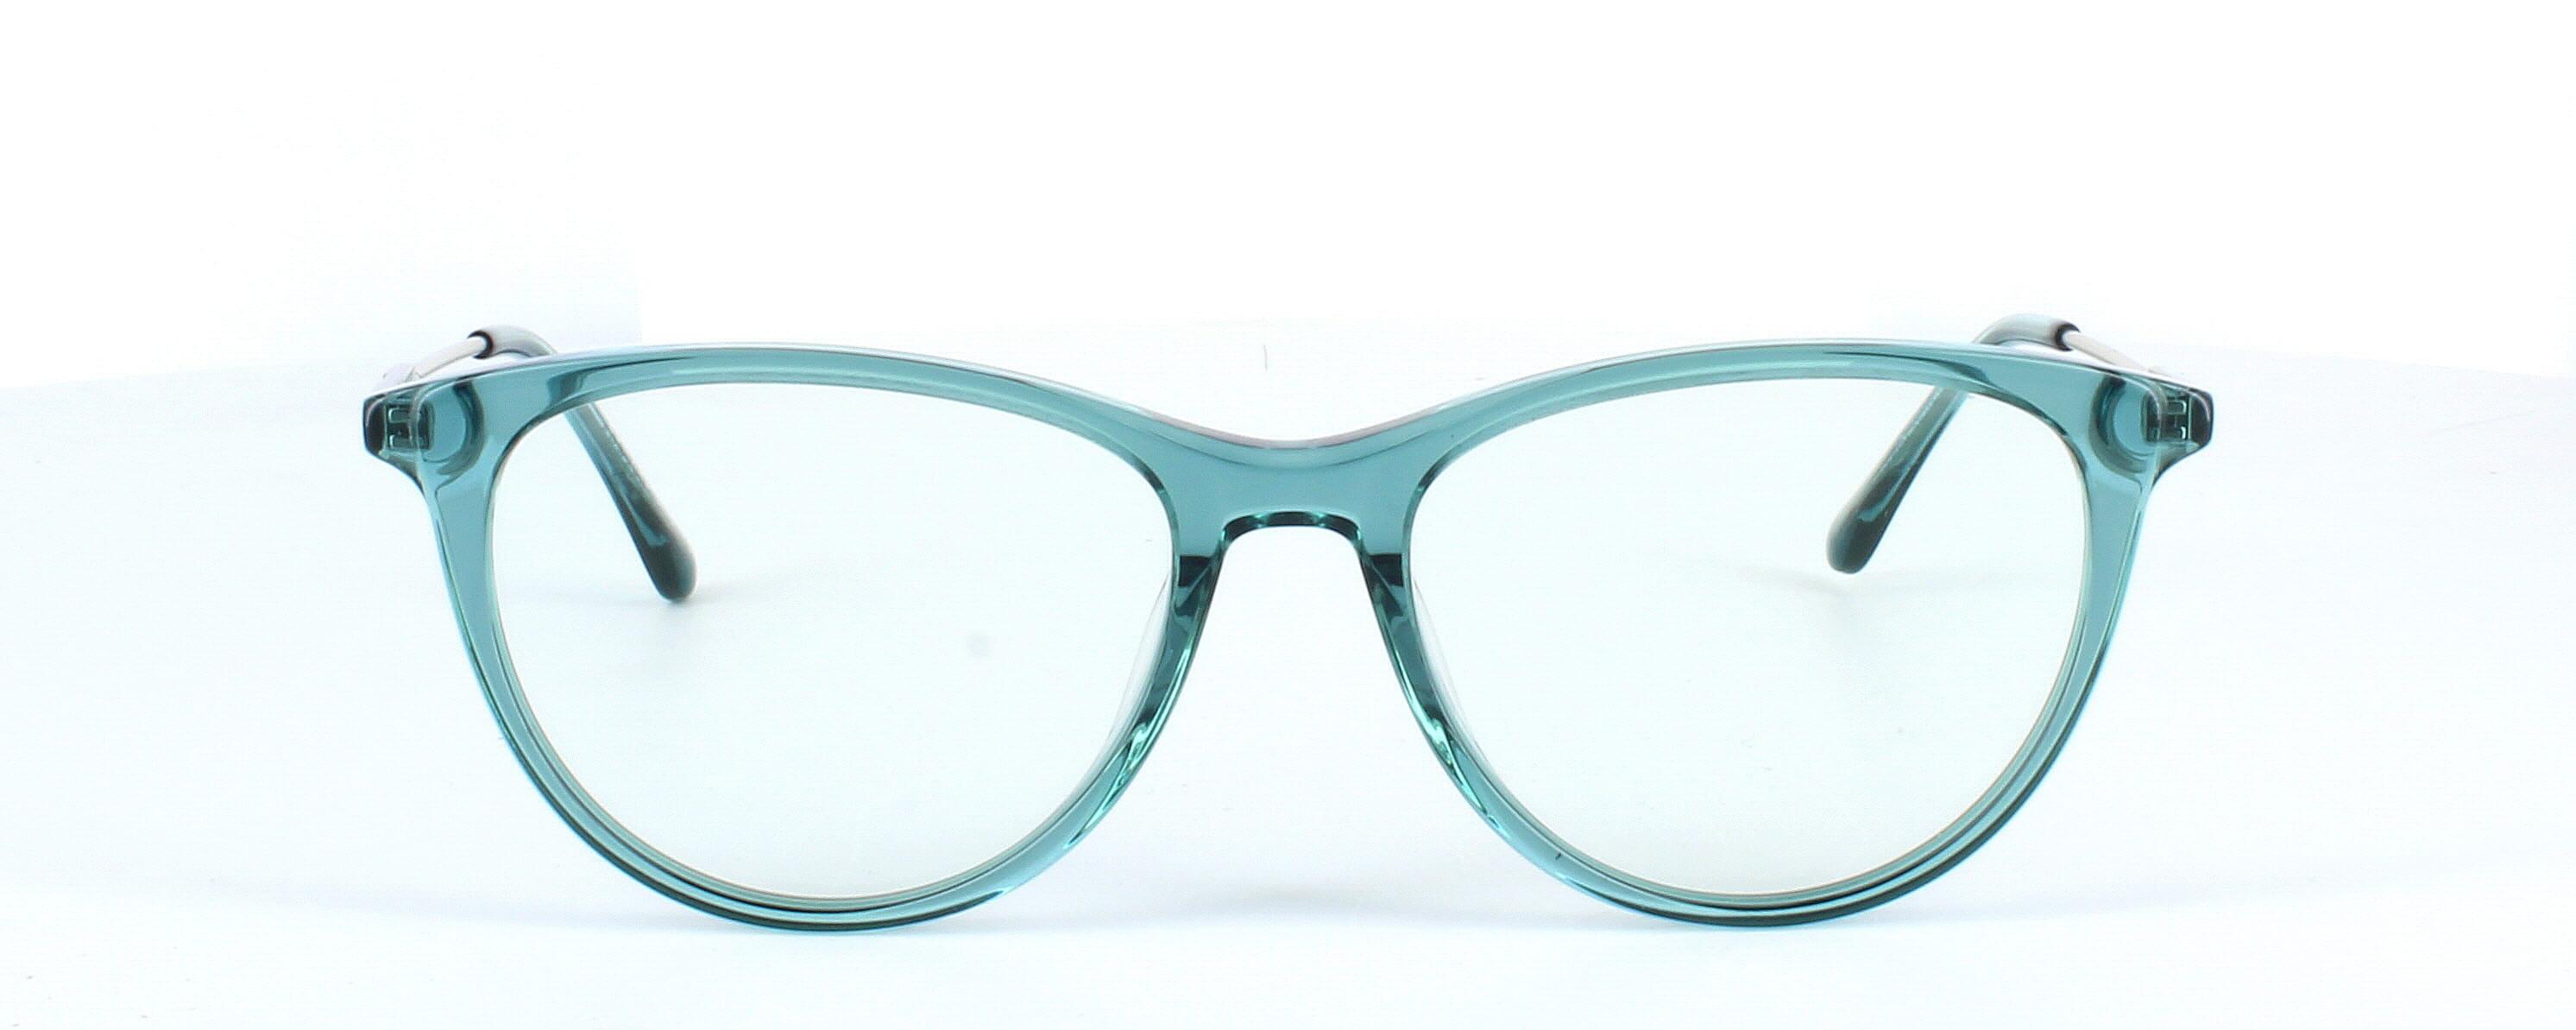 Edward Scotts BJ9201 C43 - Women's oval shaped shiny turquoise acetate glasses with gold metal spring hinged arms - image view 2